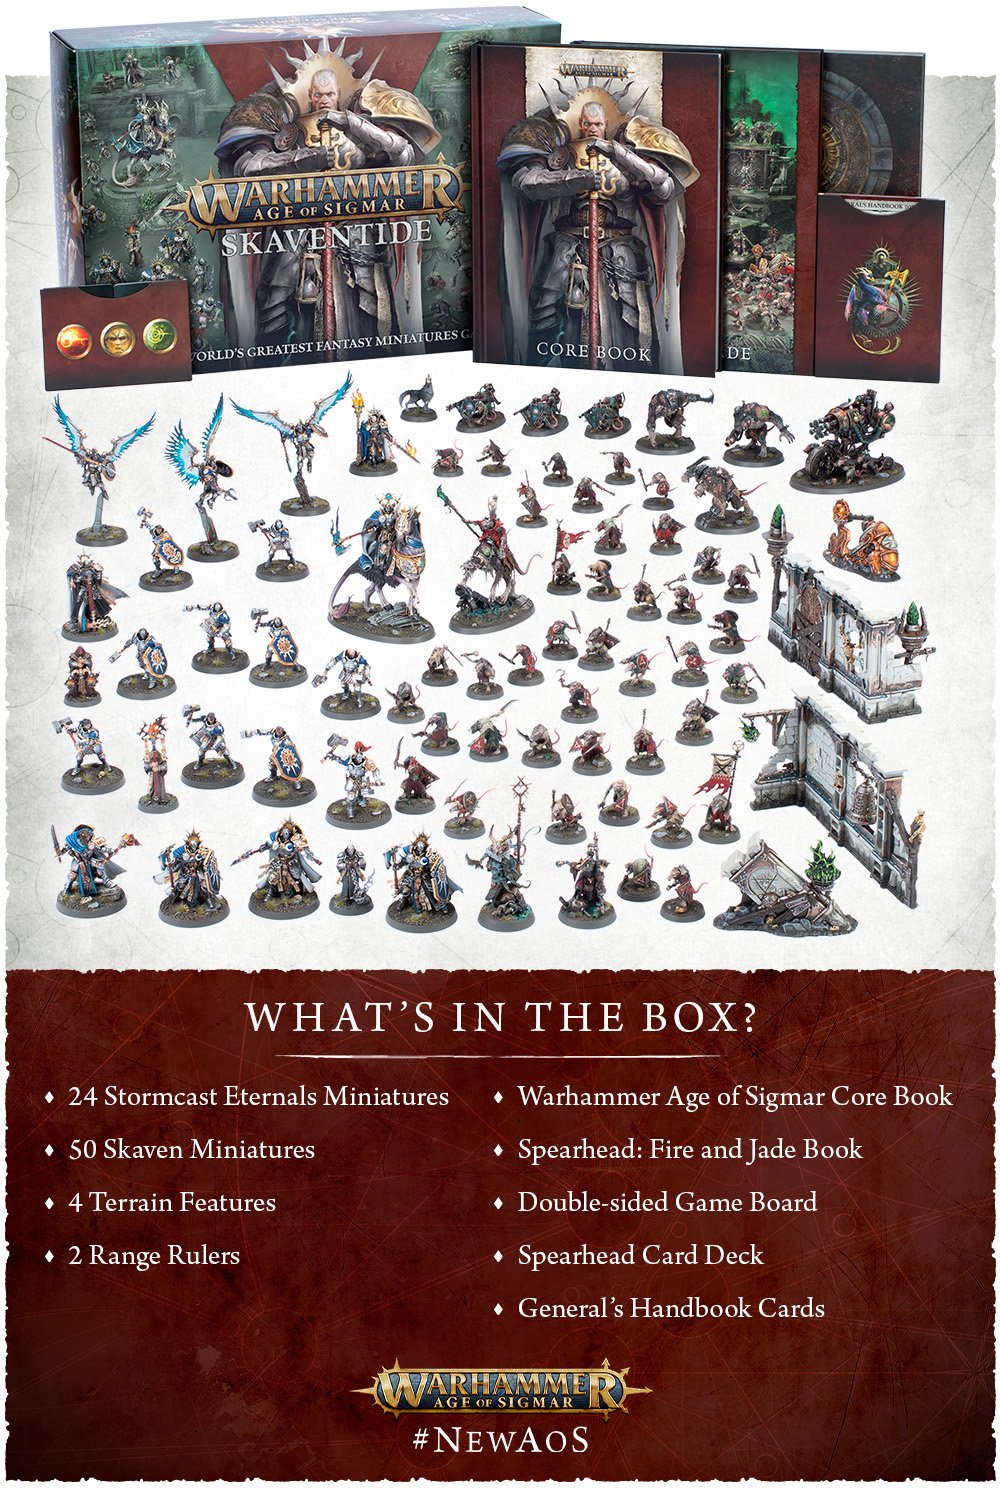 Get ready for the new release of Warhammer Age of Sigmar: Skaventide!